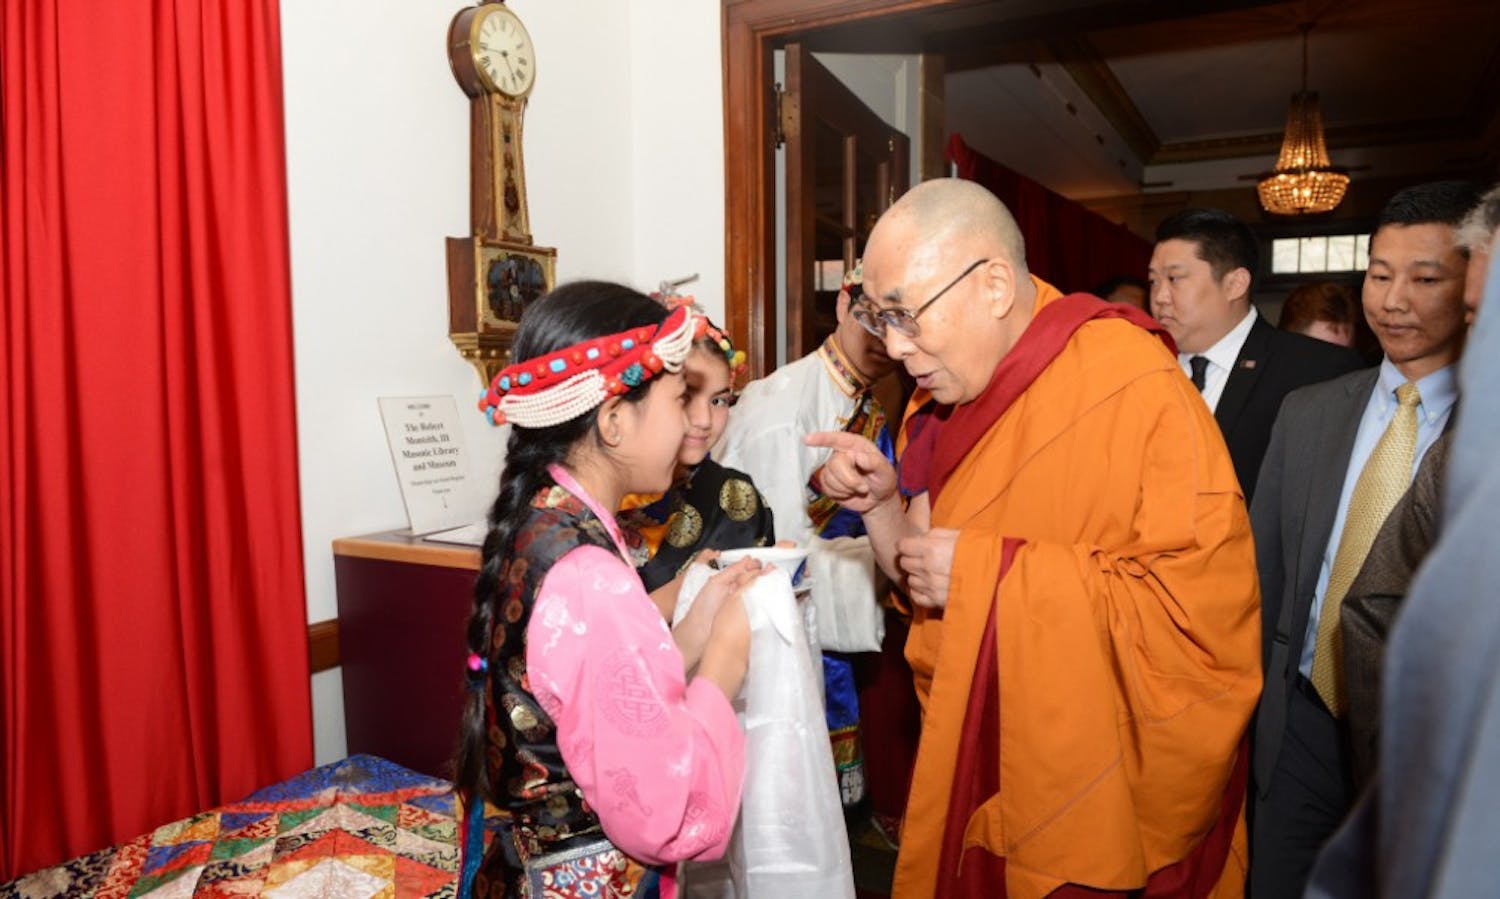 His Holiness the Dalai Lama is making his 10th visit to Madison this week.